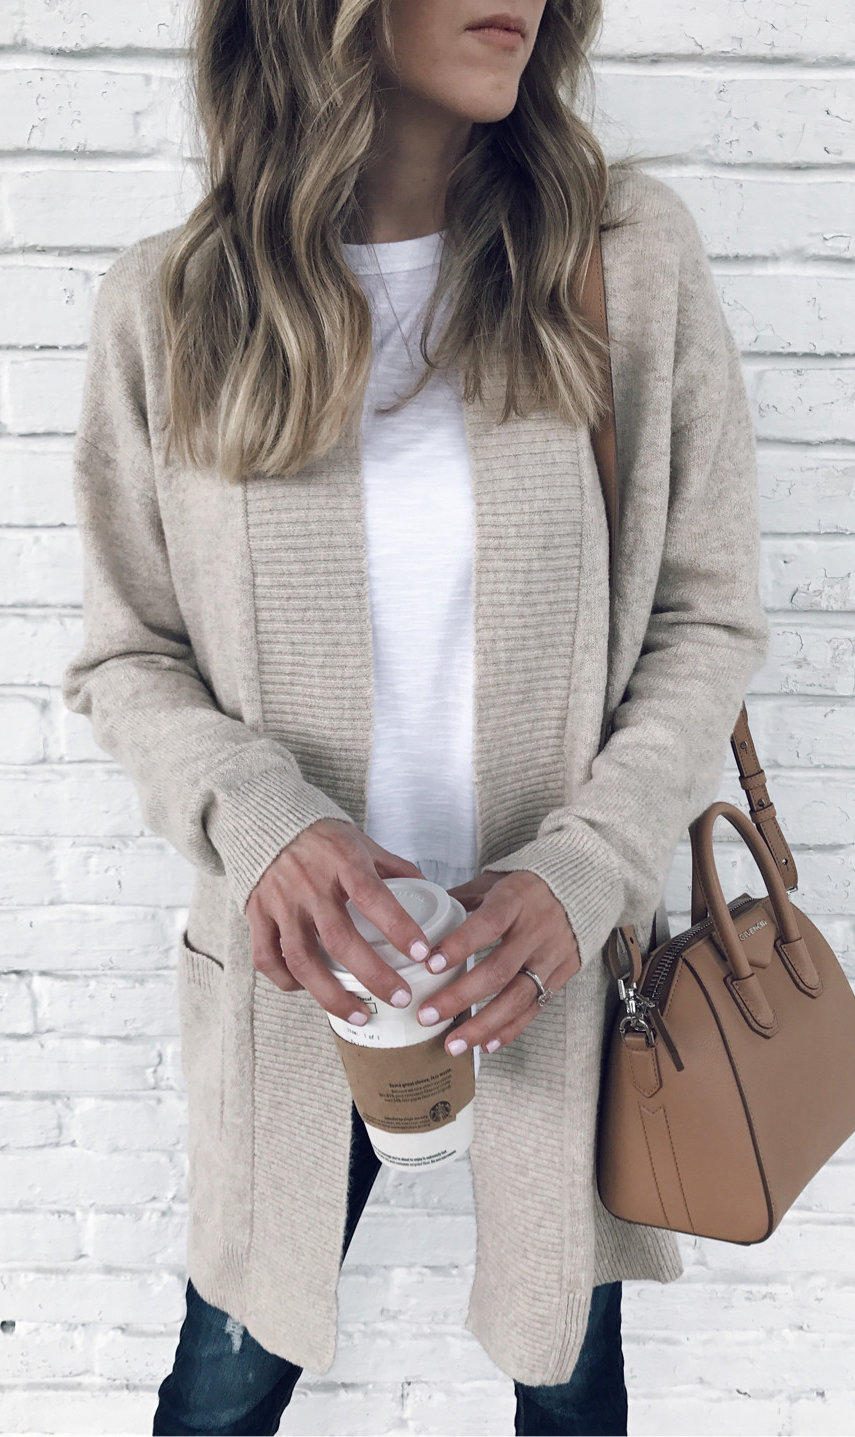 women's gray cardigan and white inner shirt outfit